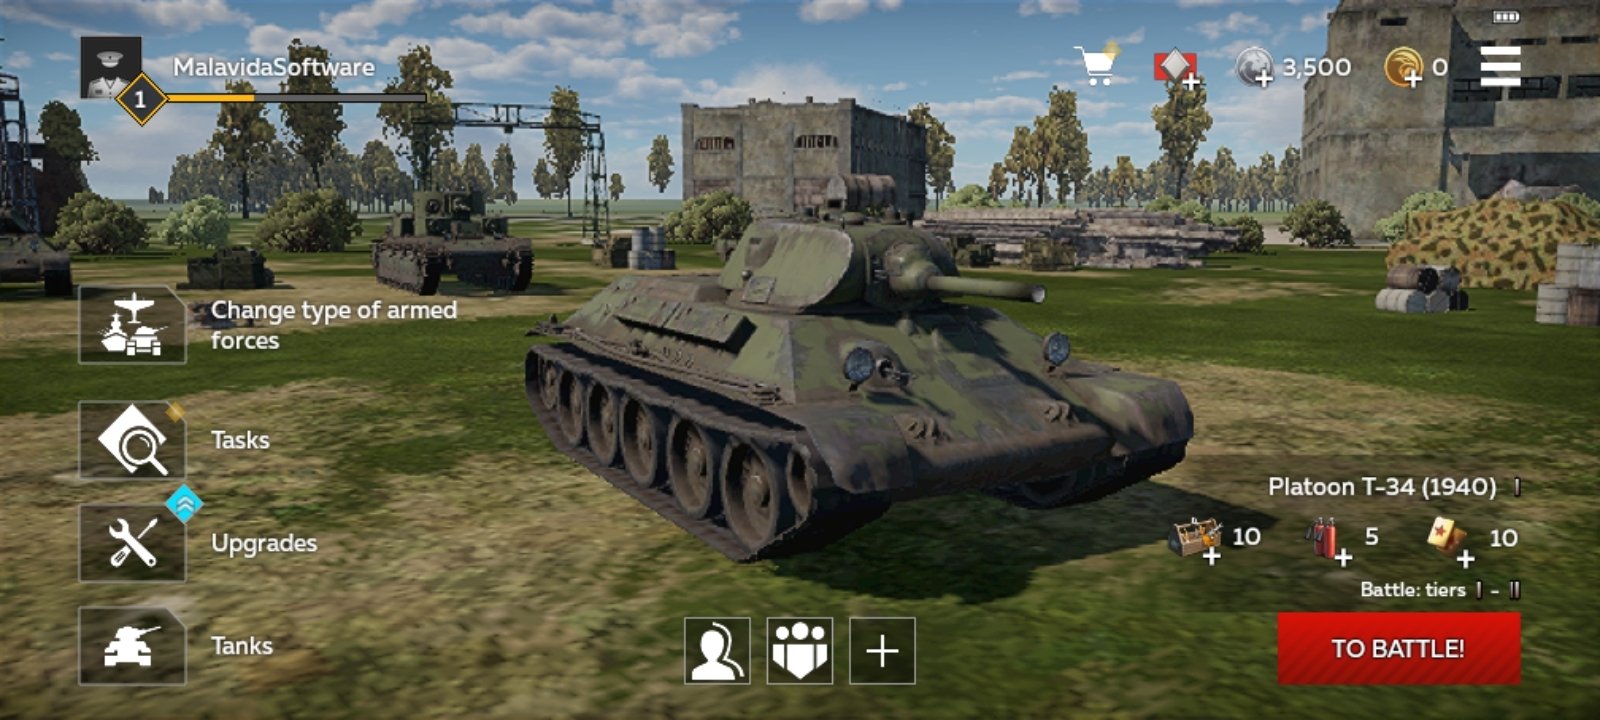 War Thunder Mobile APK Download for Android Free